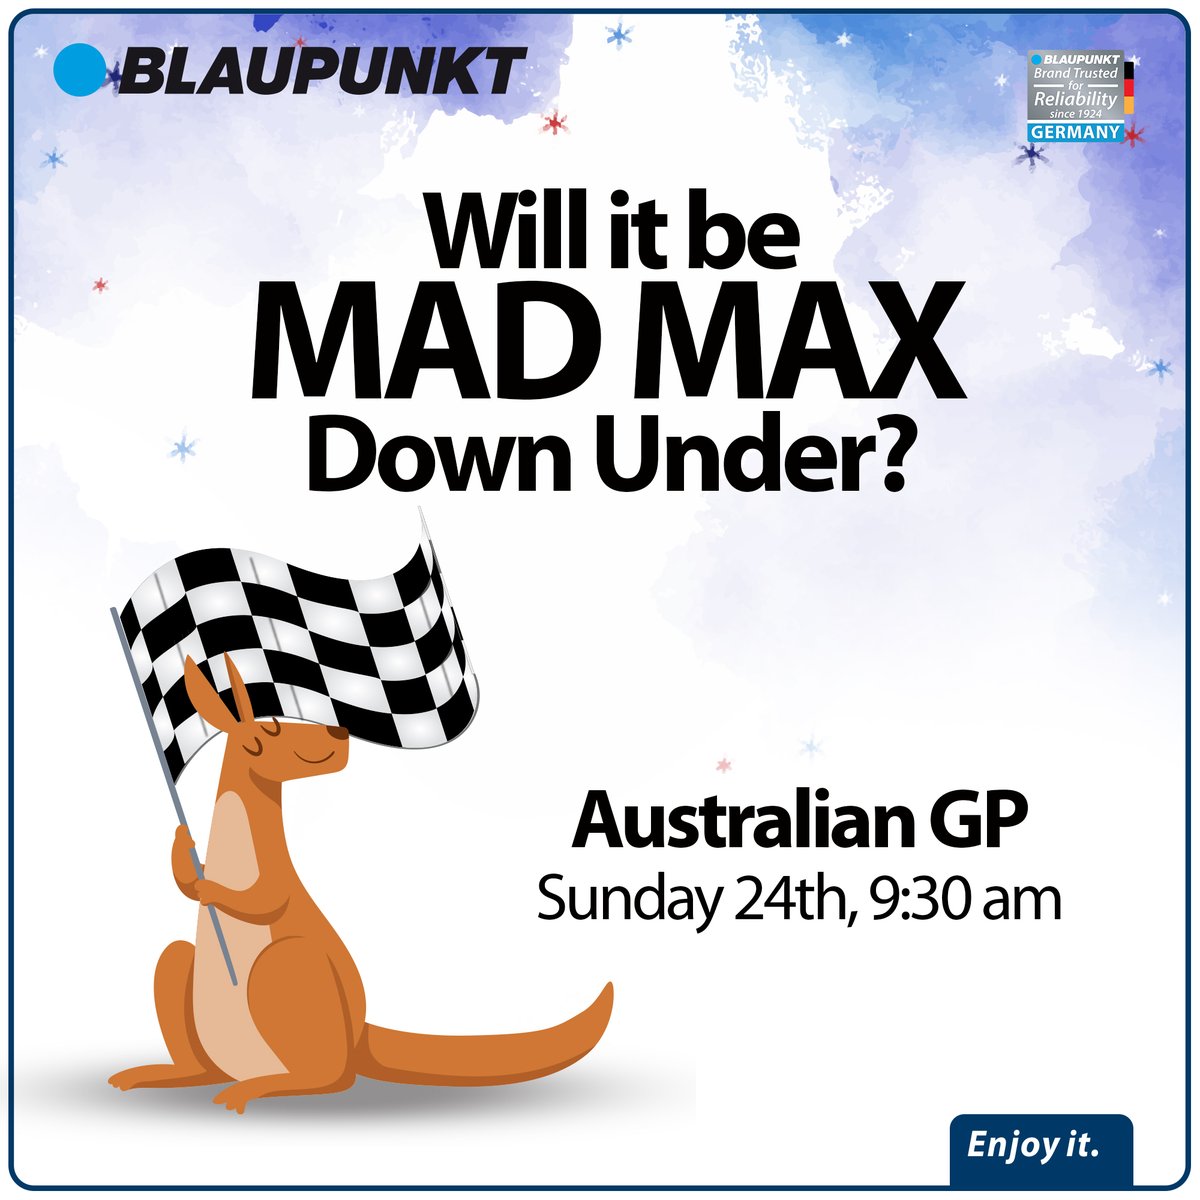 Thunder Down Under! Will Mad Max lead from the front. Or will somebody else (Hamilton or George, we hope) go up front. It's going to be a great race so warm up your engines! #F1 #AustralianGP #madmax #LewisHamilton #Formula1